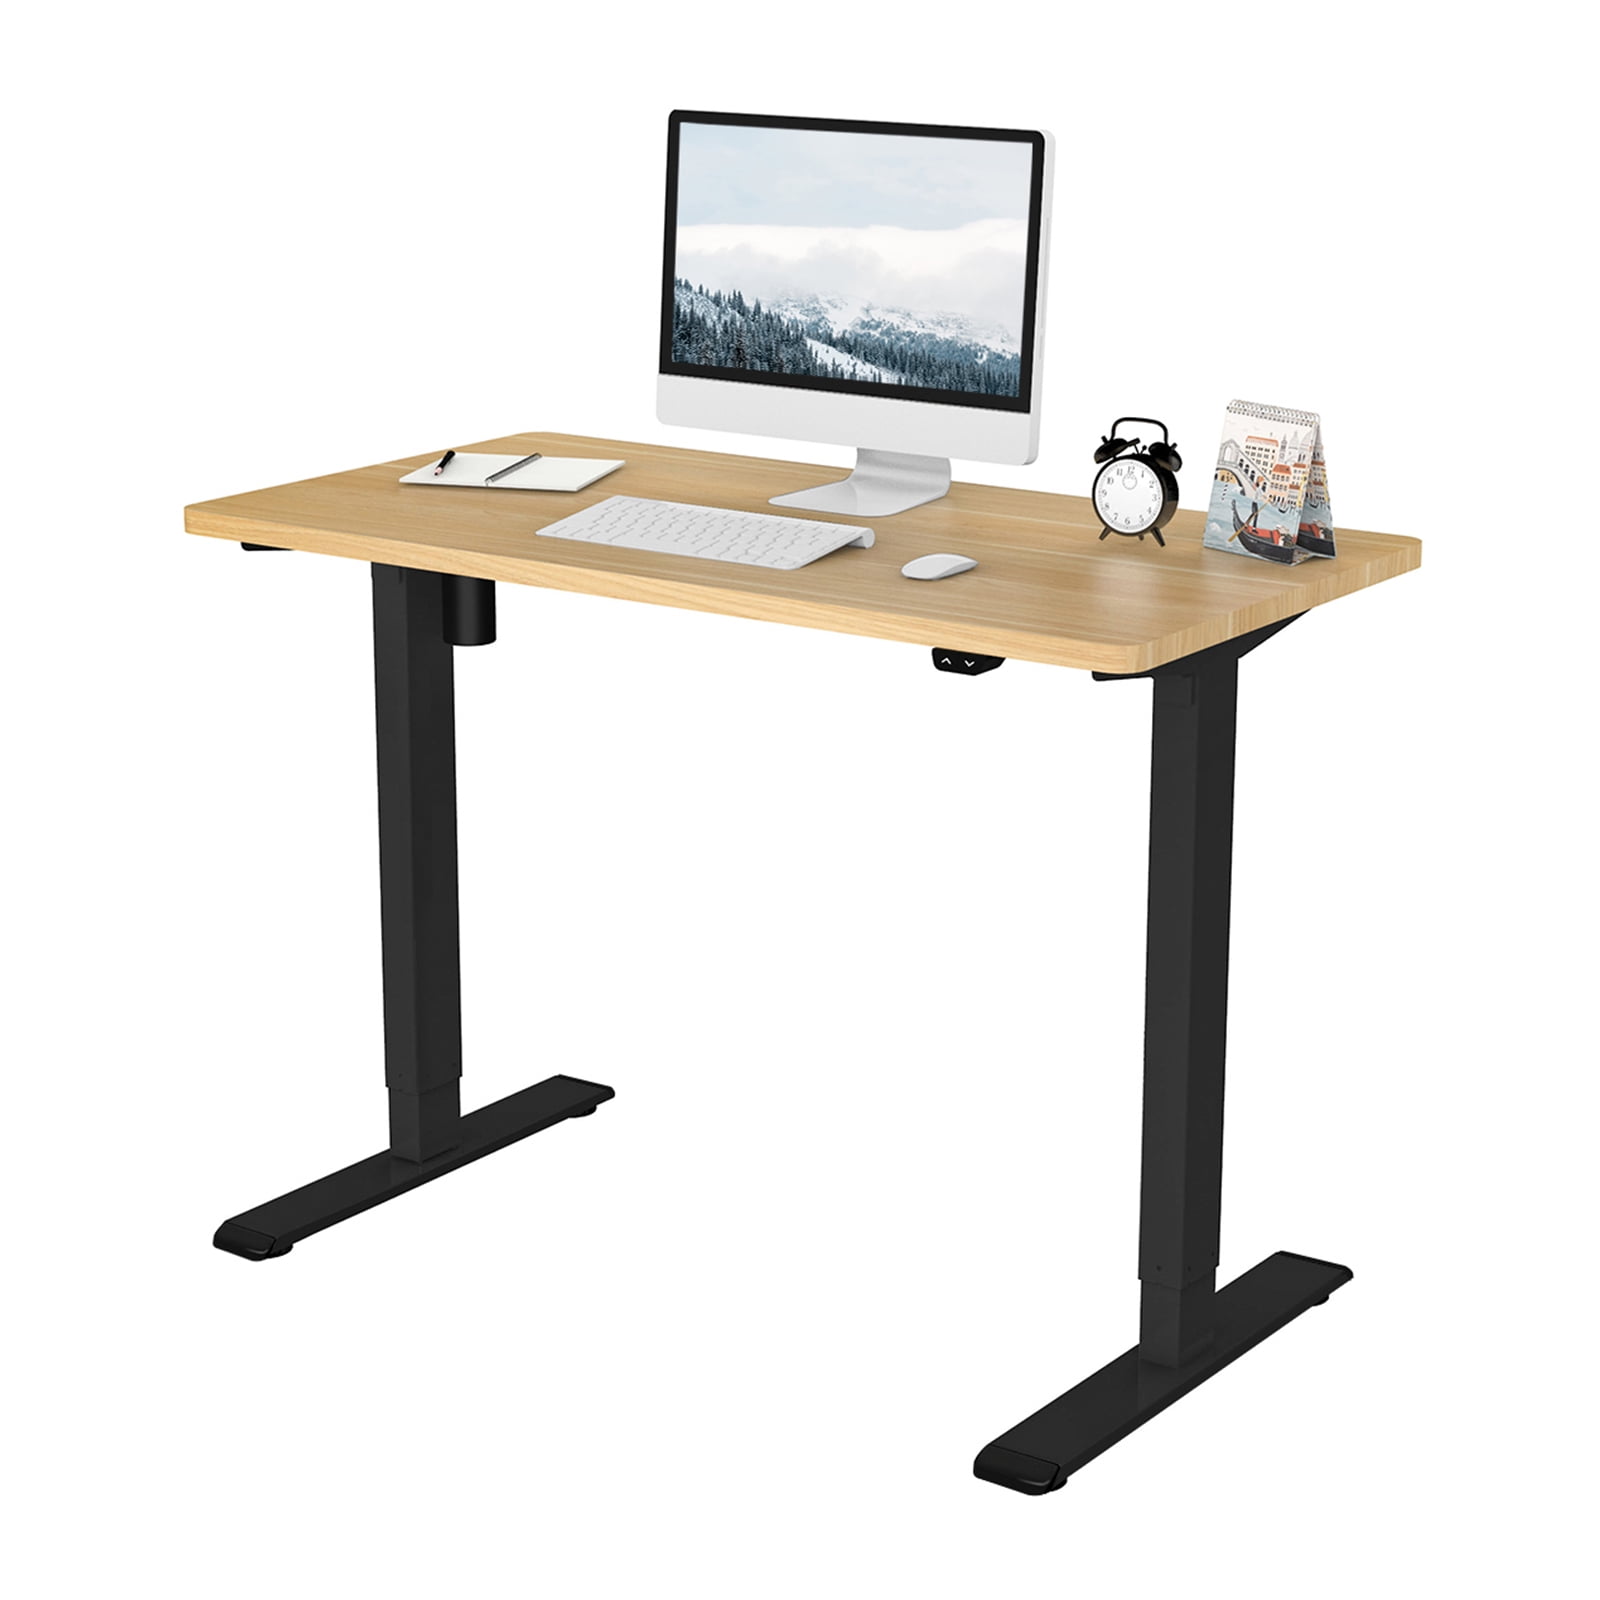 Don't sit on these last-minute standing desk deals from Flexispot this  Prime Day